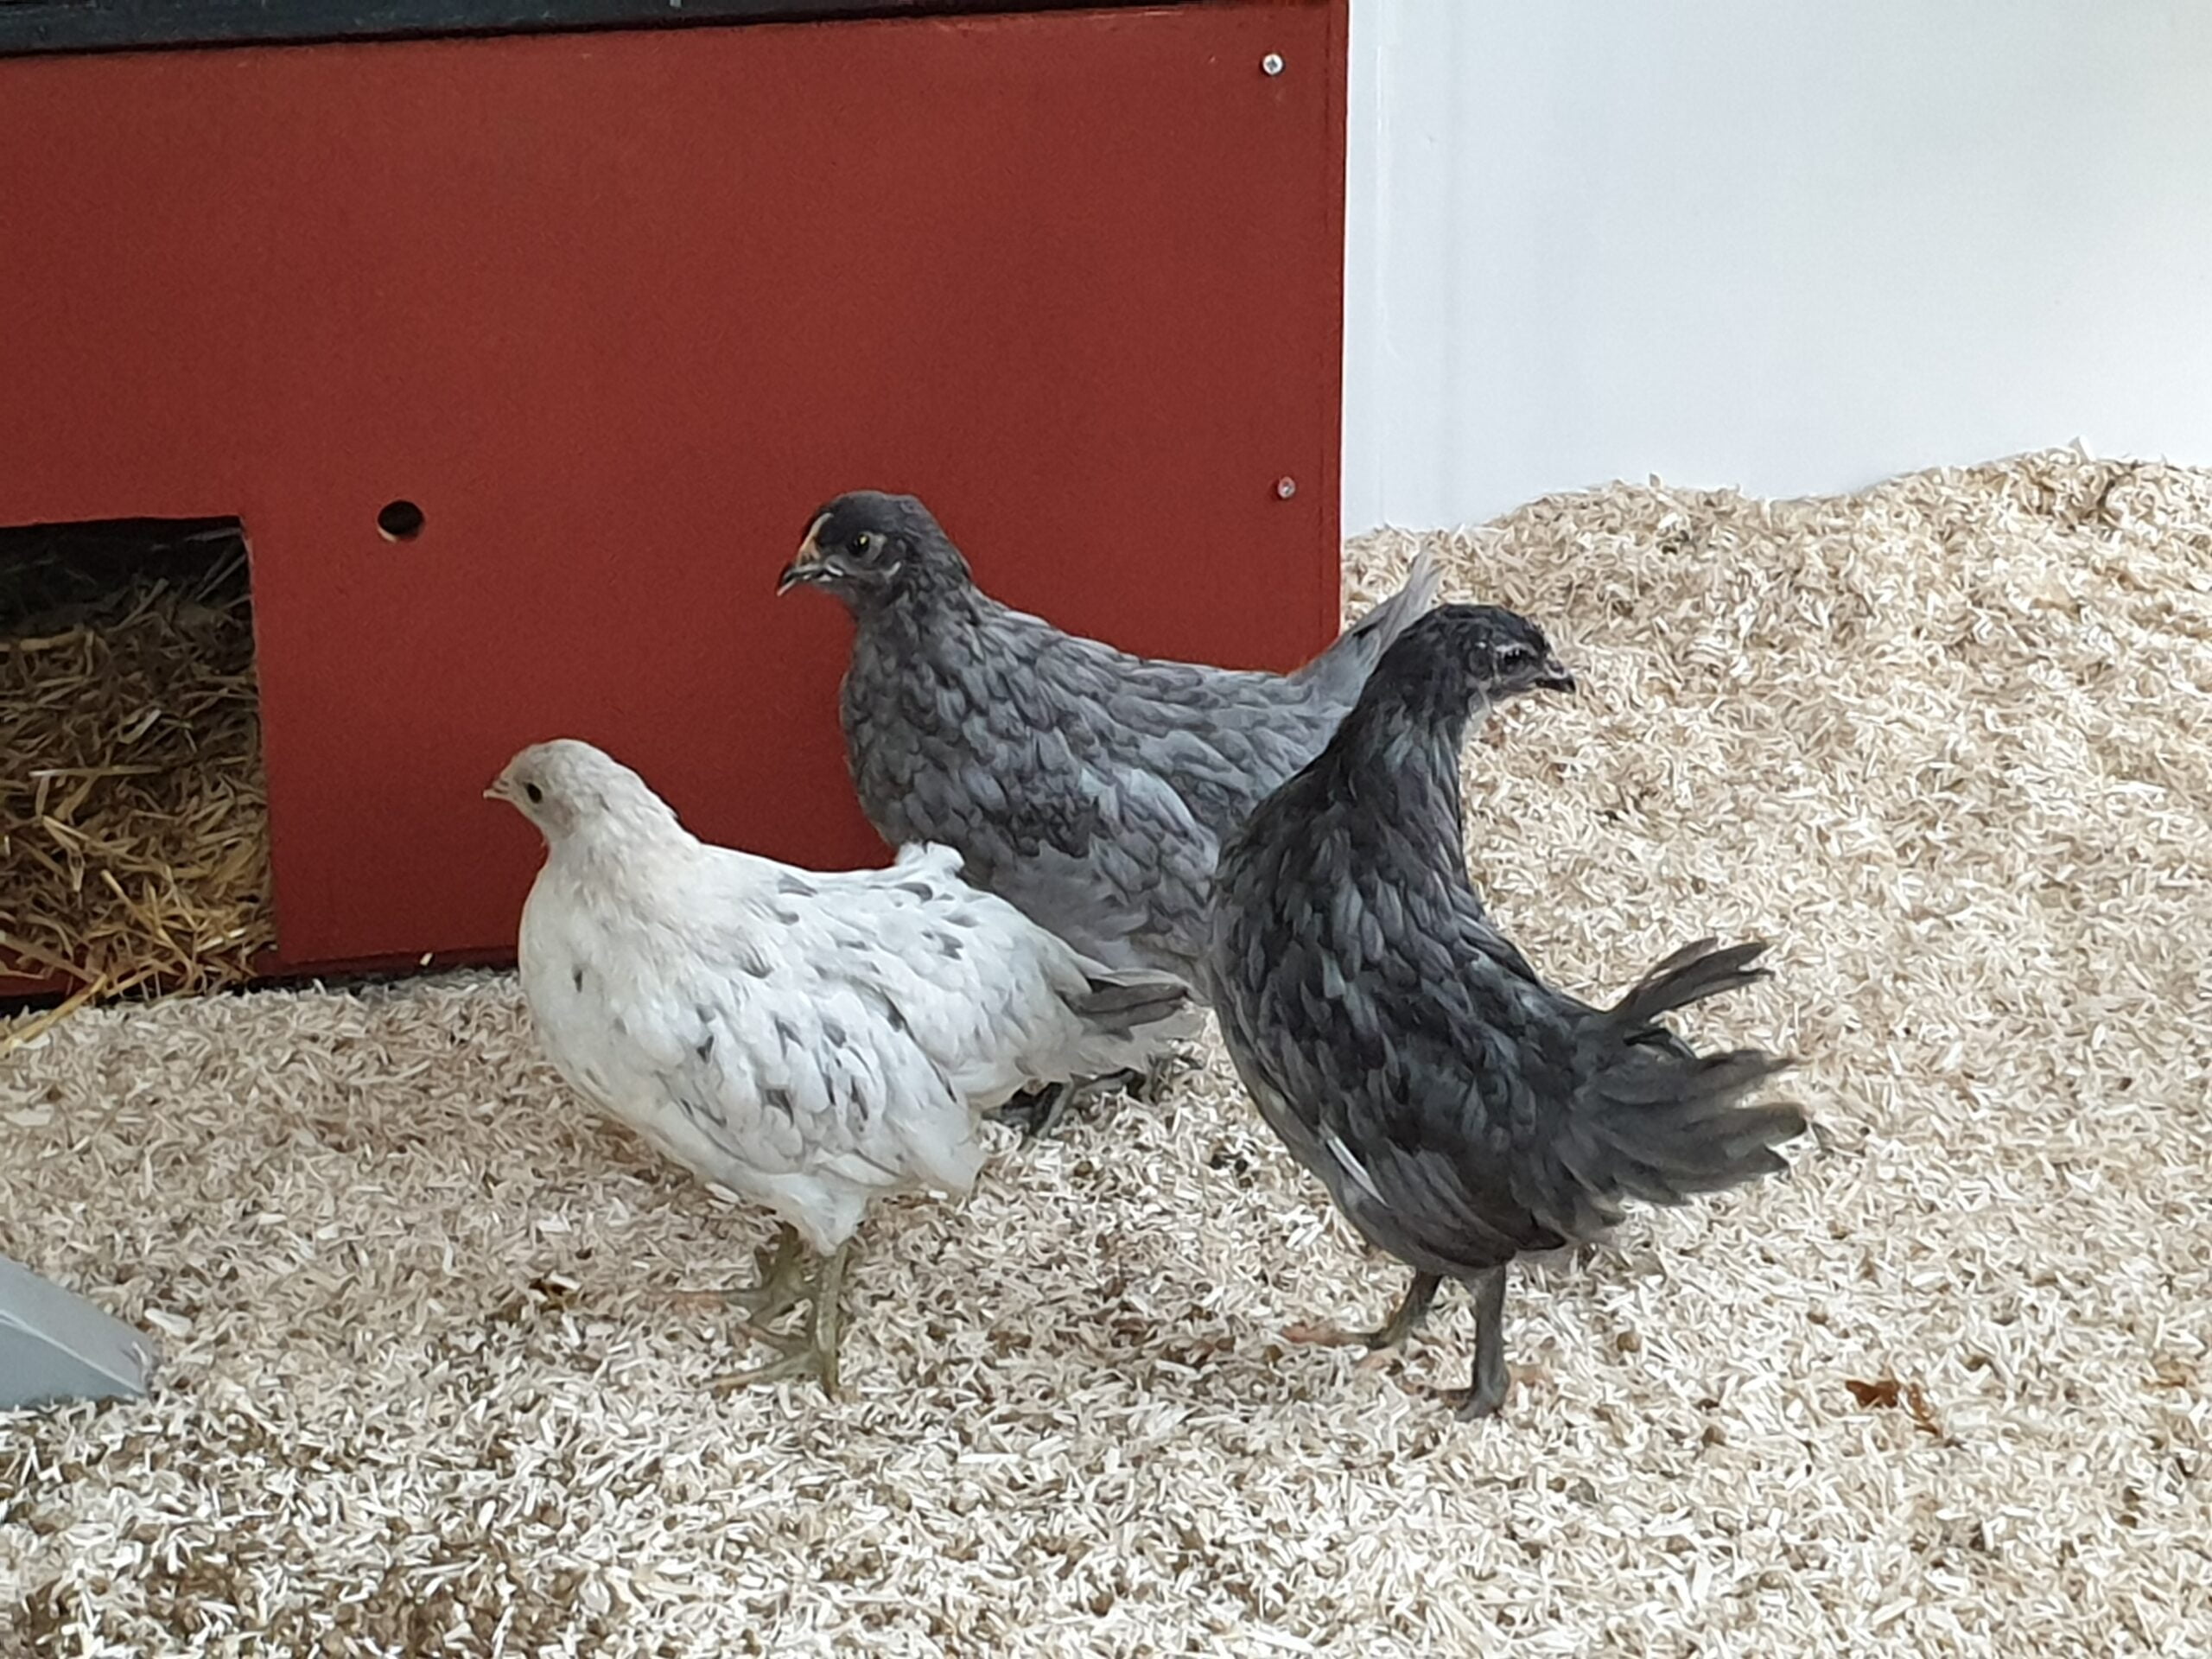 Three chickens on a bed of wood shavings: one white and two gray, near a red coop with a visible nesting box.